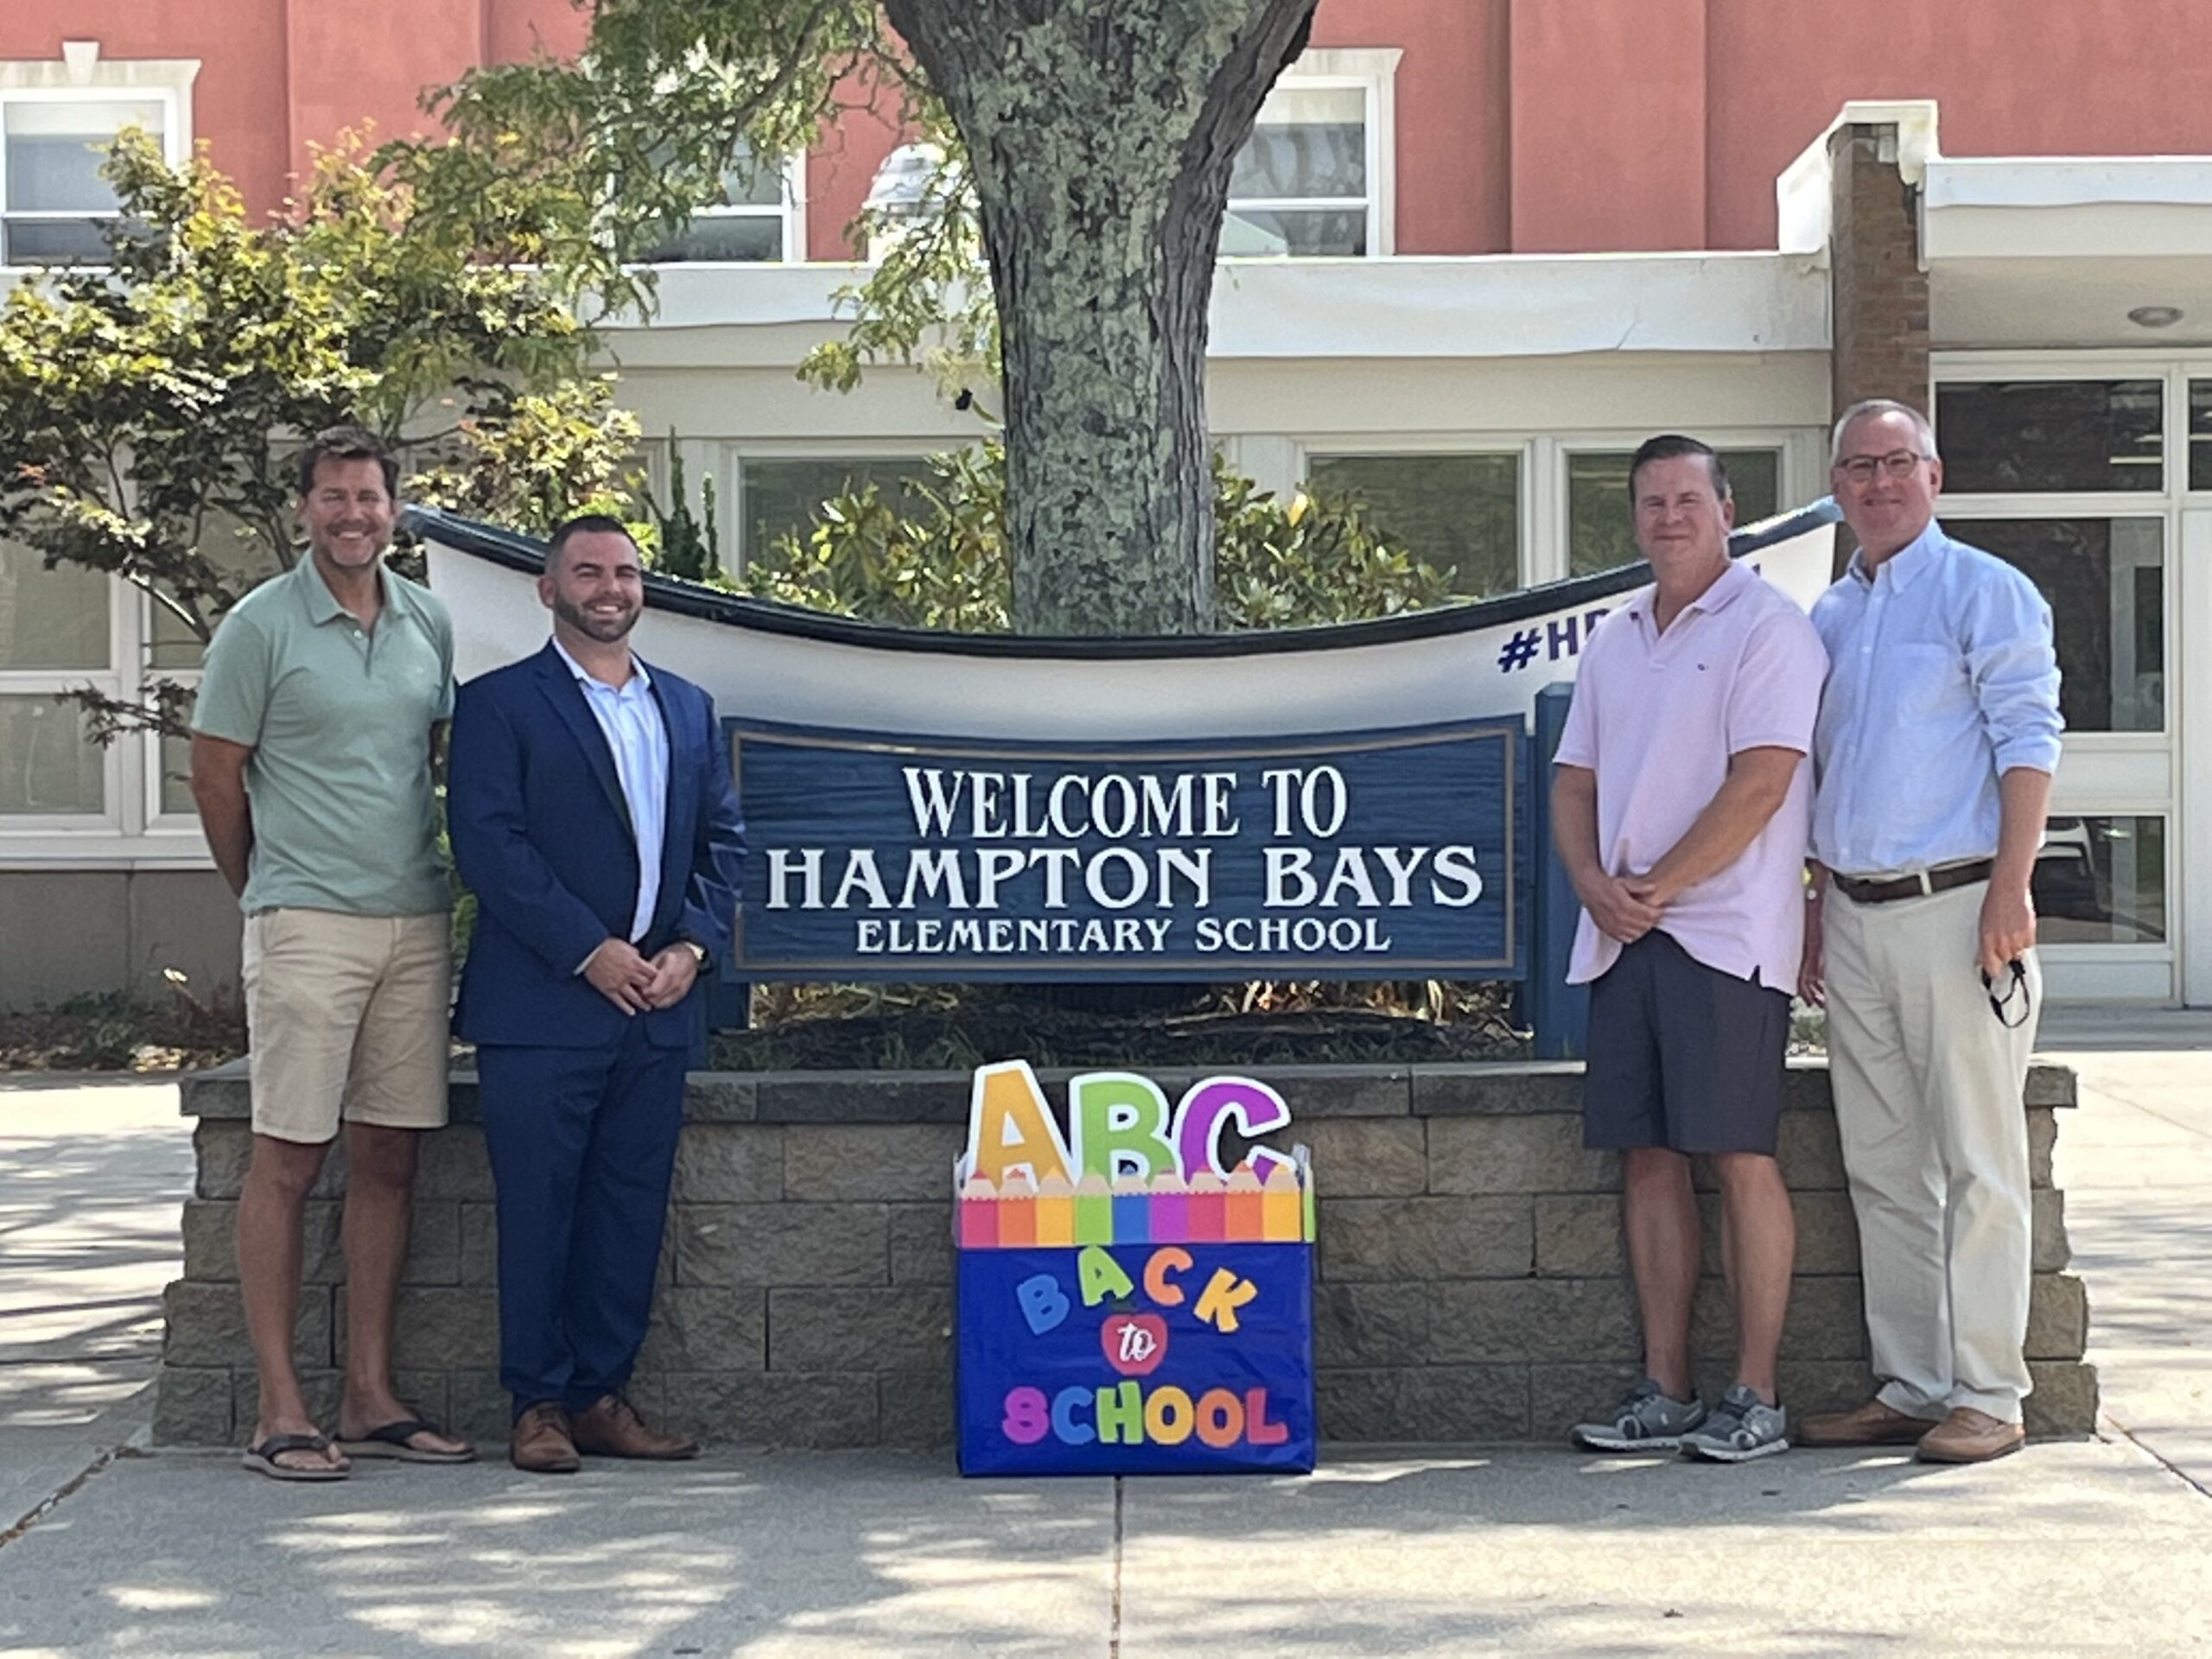 Hampton Bays Elementary School received a bundle of school supplies from Brian Pellone of Allstate Insurance. The donation will be distributed to students in need. From left, Assistant Principal Richard Triandafils, Pellone, Principal Marc Meyer and Superintendent of Schools Lars Clemensen. COURTESY HAMPTON BAYS SCHOOL DISTRICT